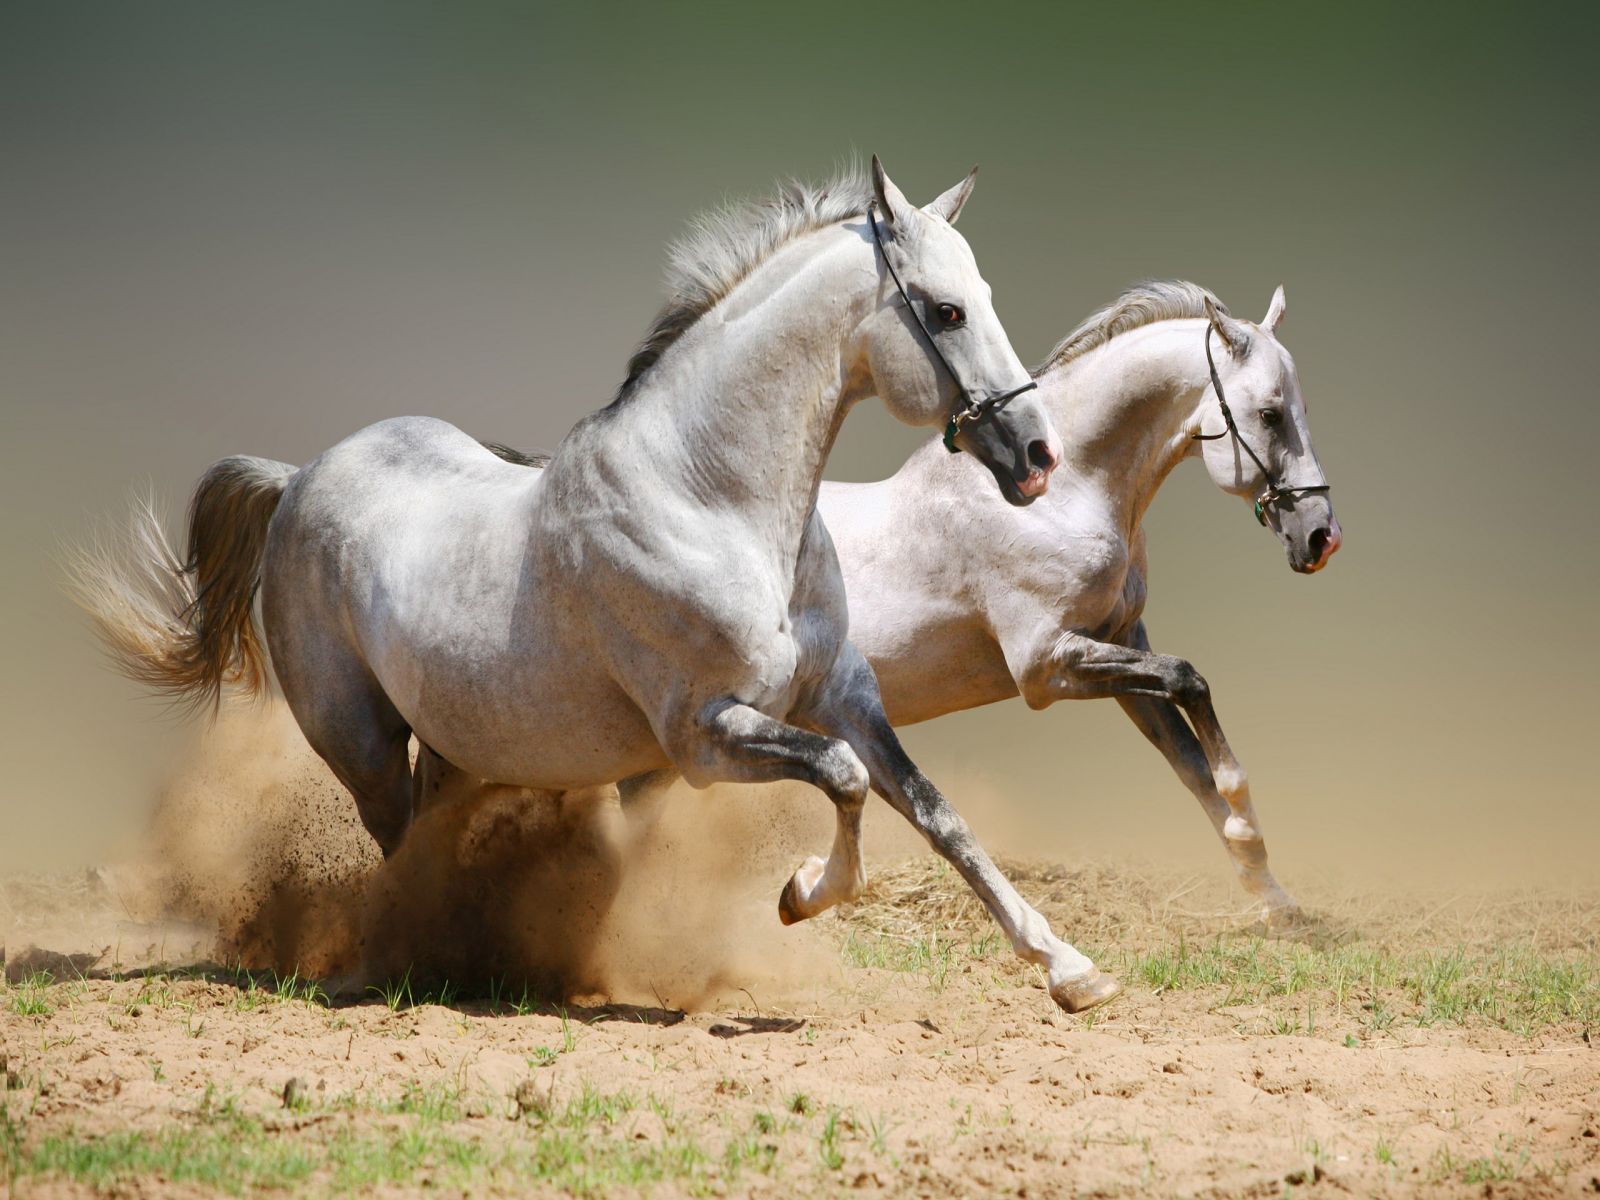 Horse Wallpaper for Computer Free Wide Wallpapers 1600x1200px